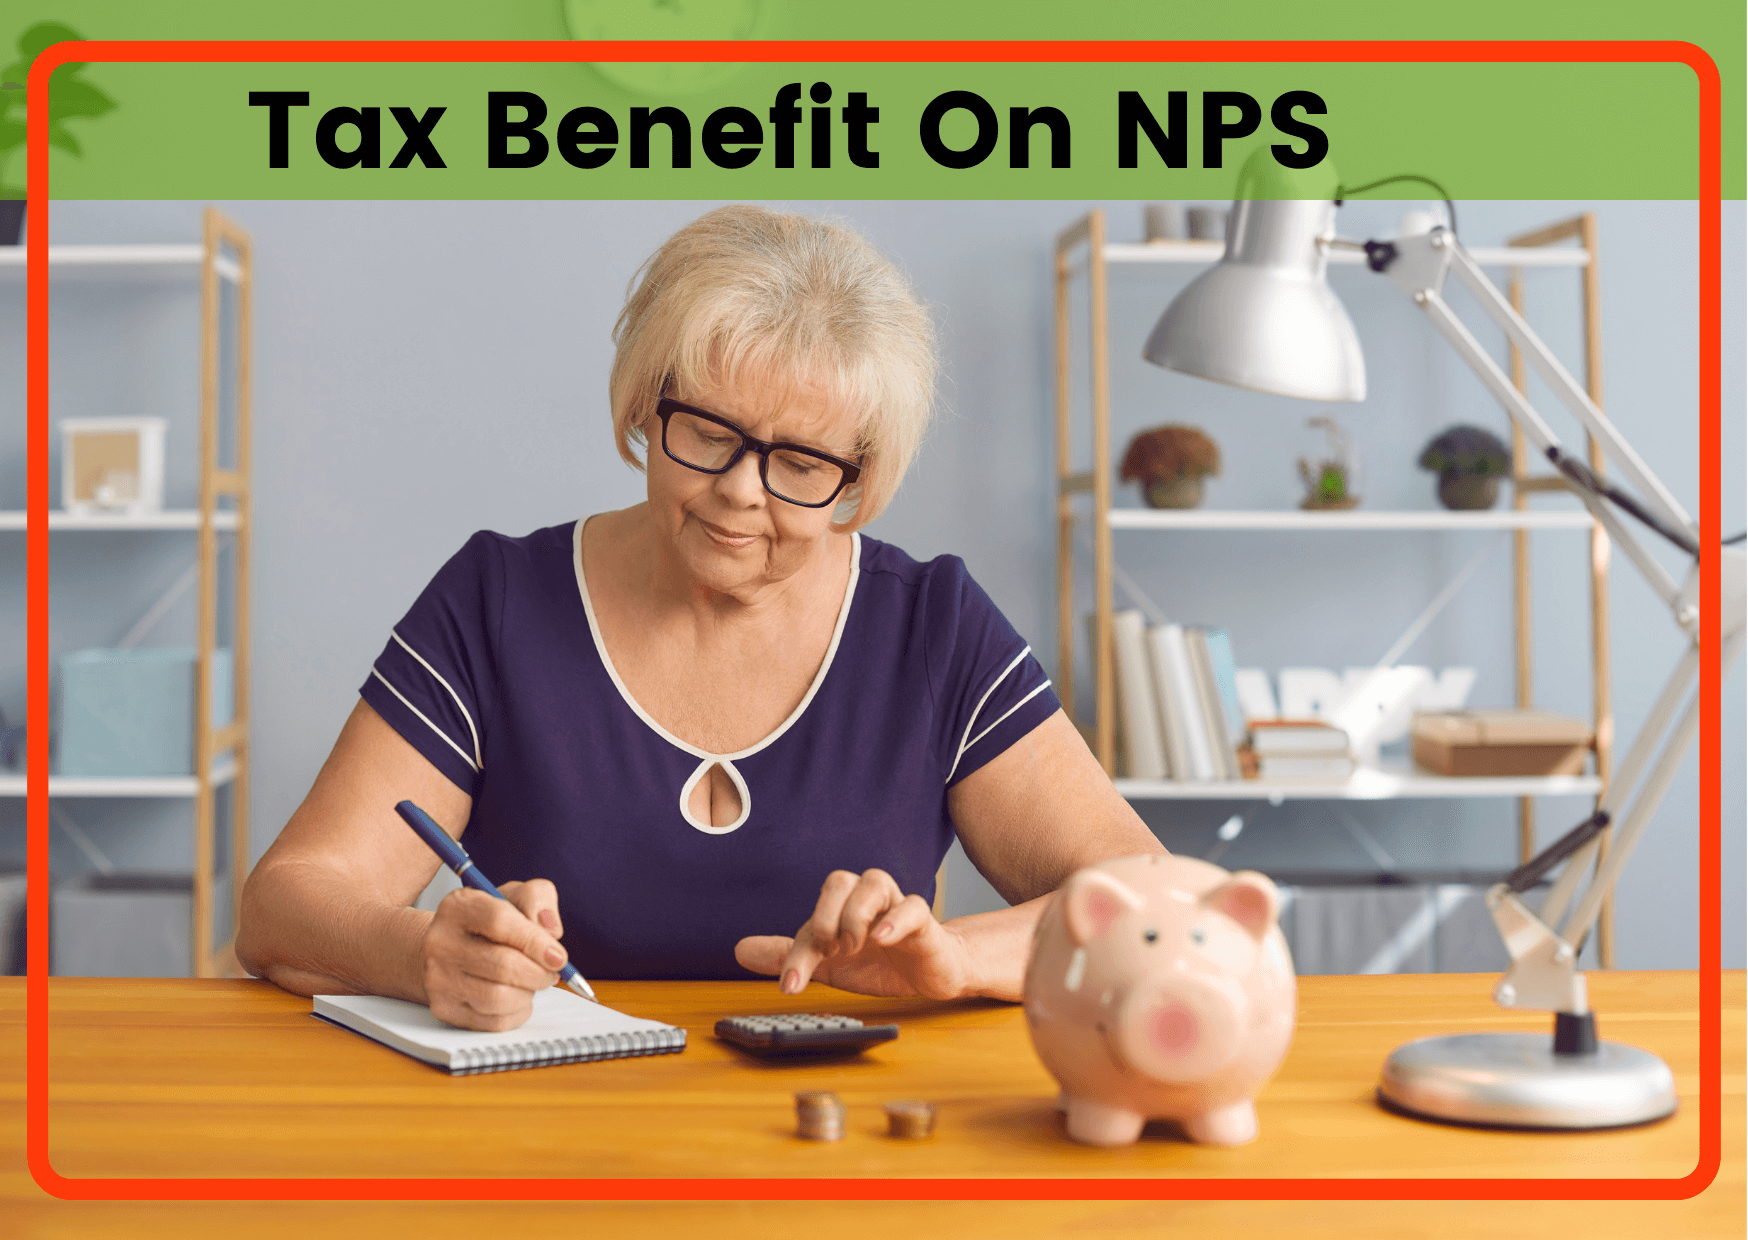 Nps For Tax Benefit